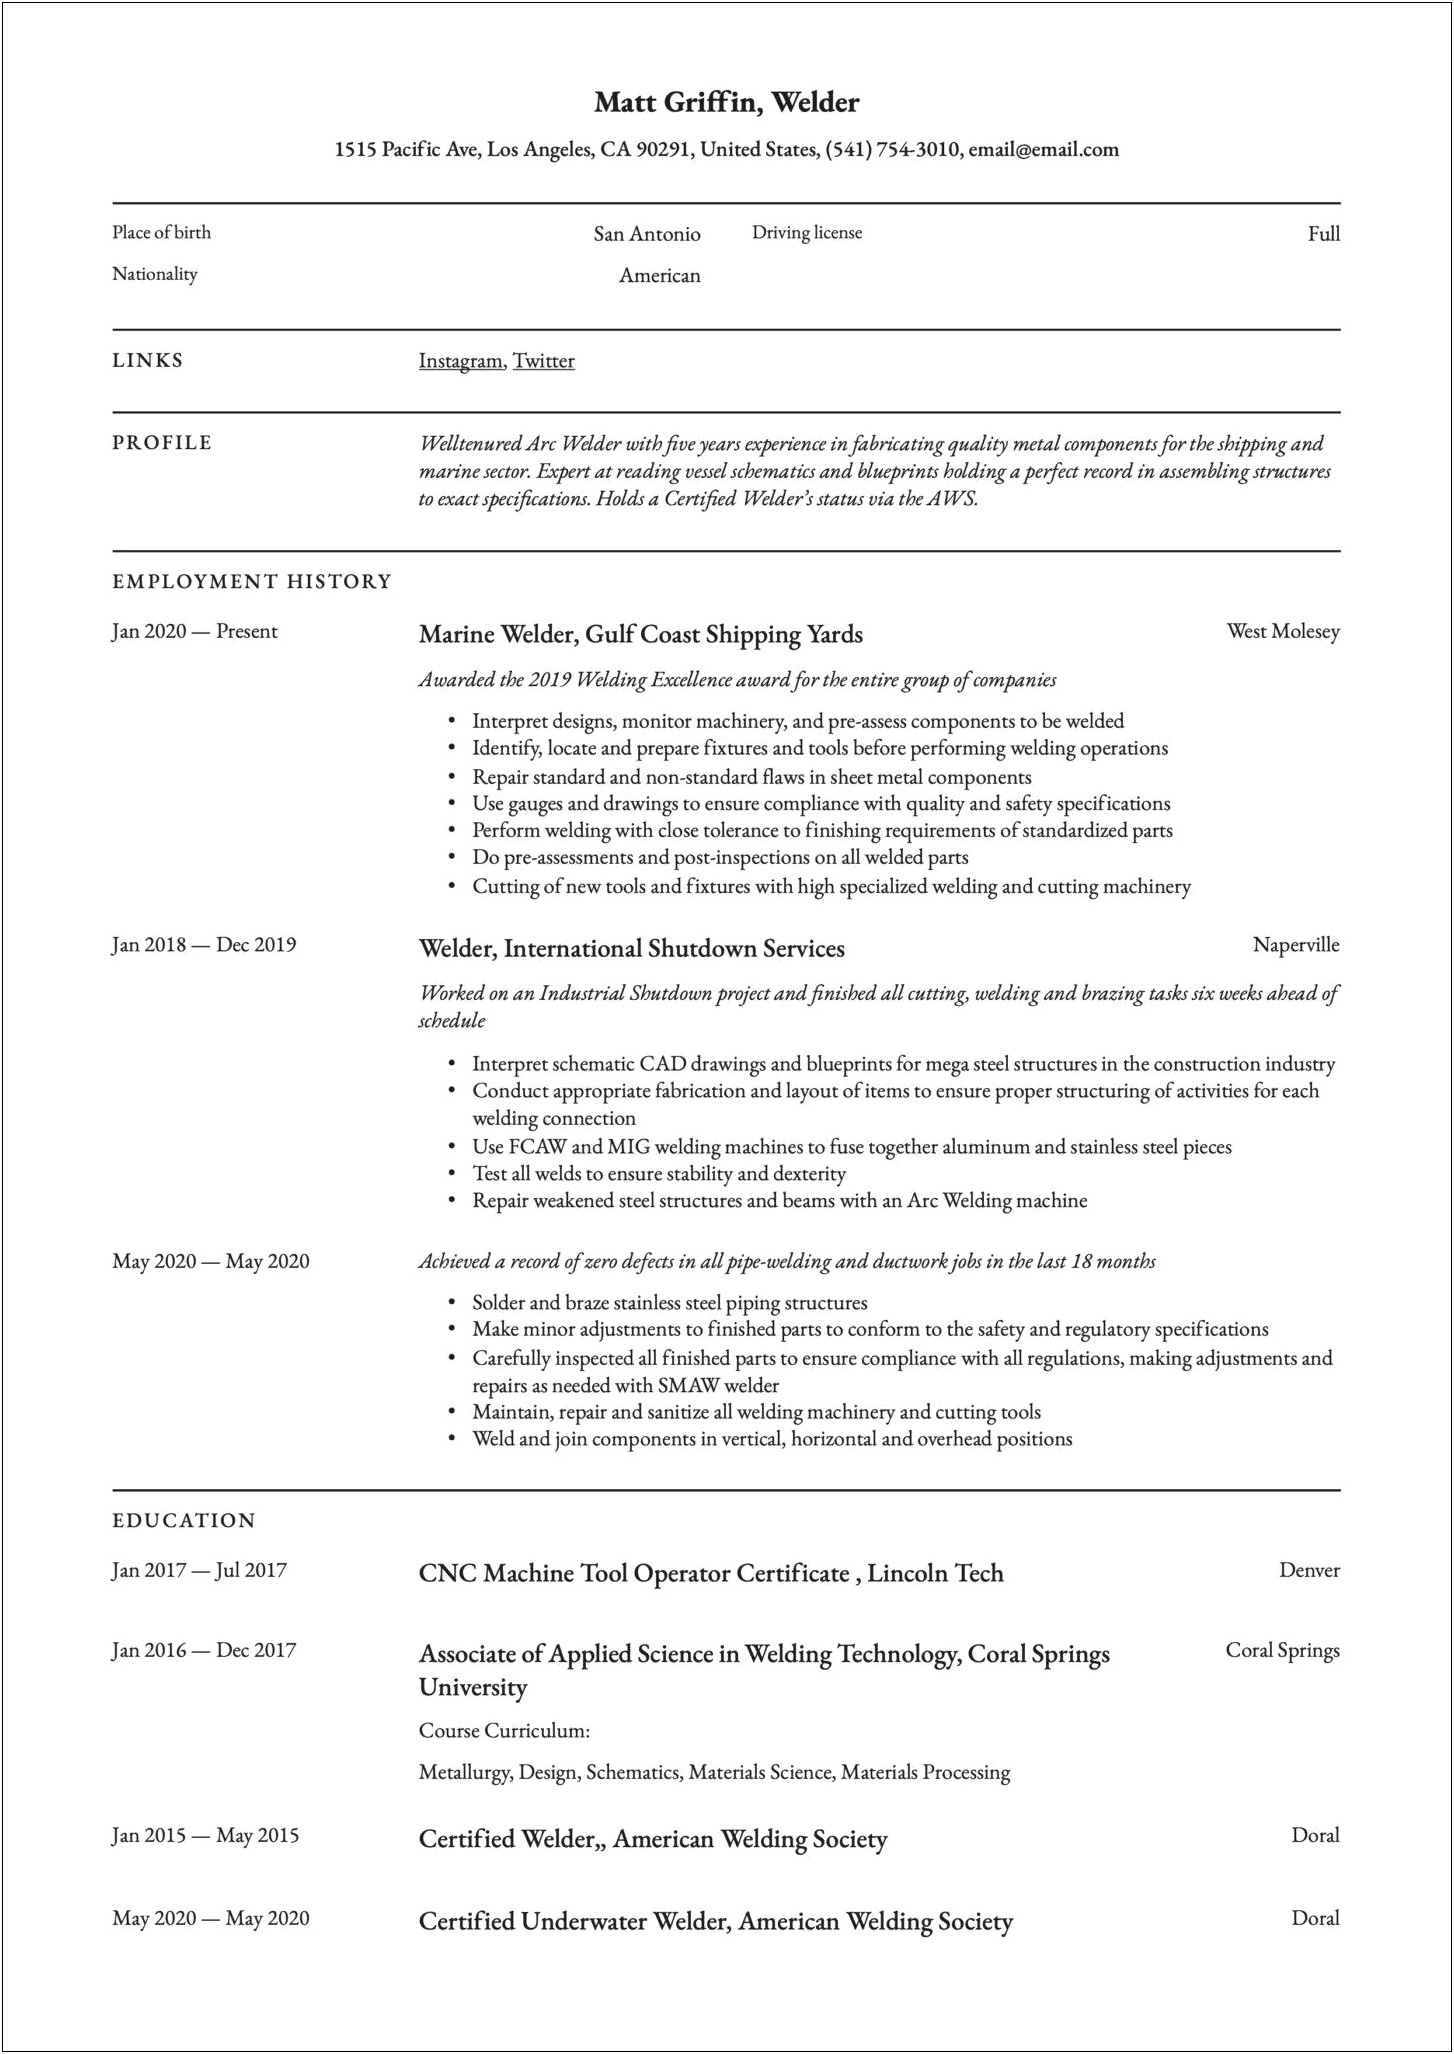 Free Resume Templates For Welders